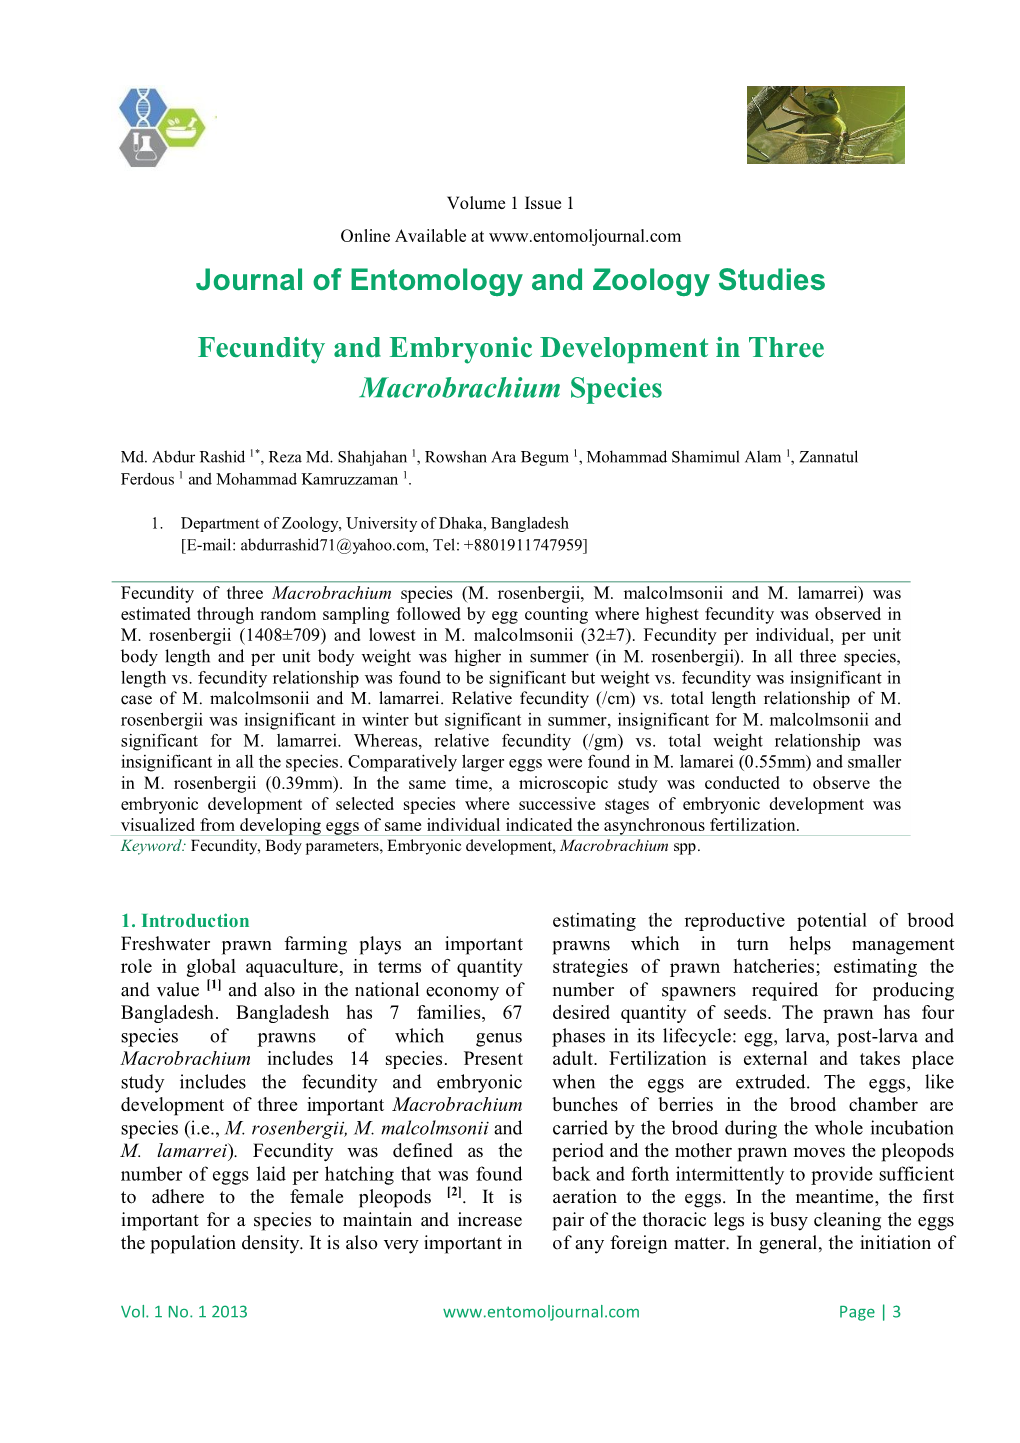 Journal of Entomology and Zoology Studies Fecundity and Embryonic